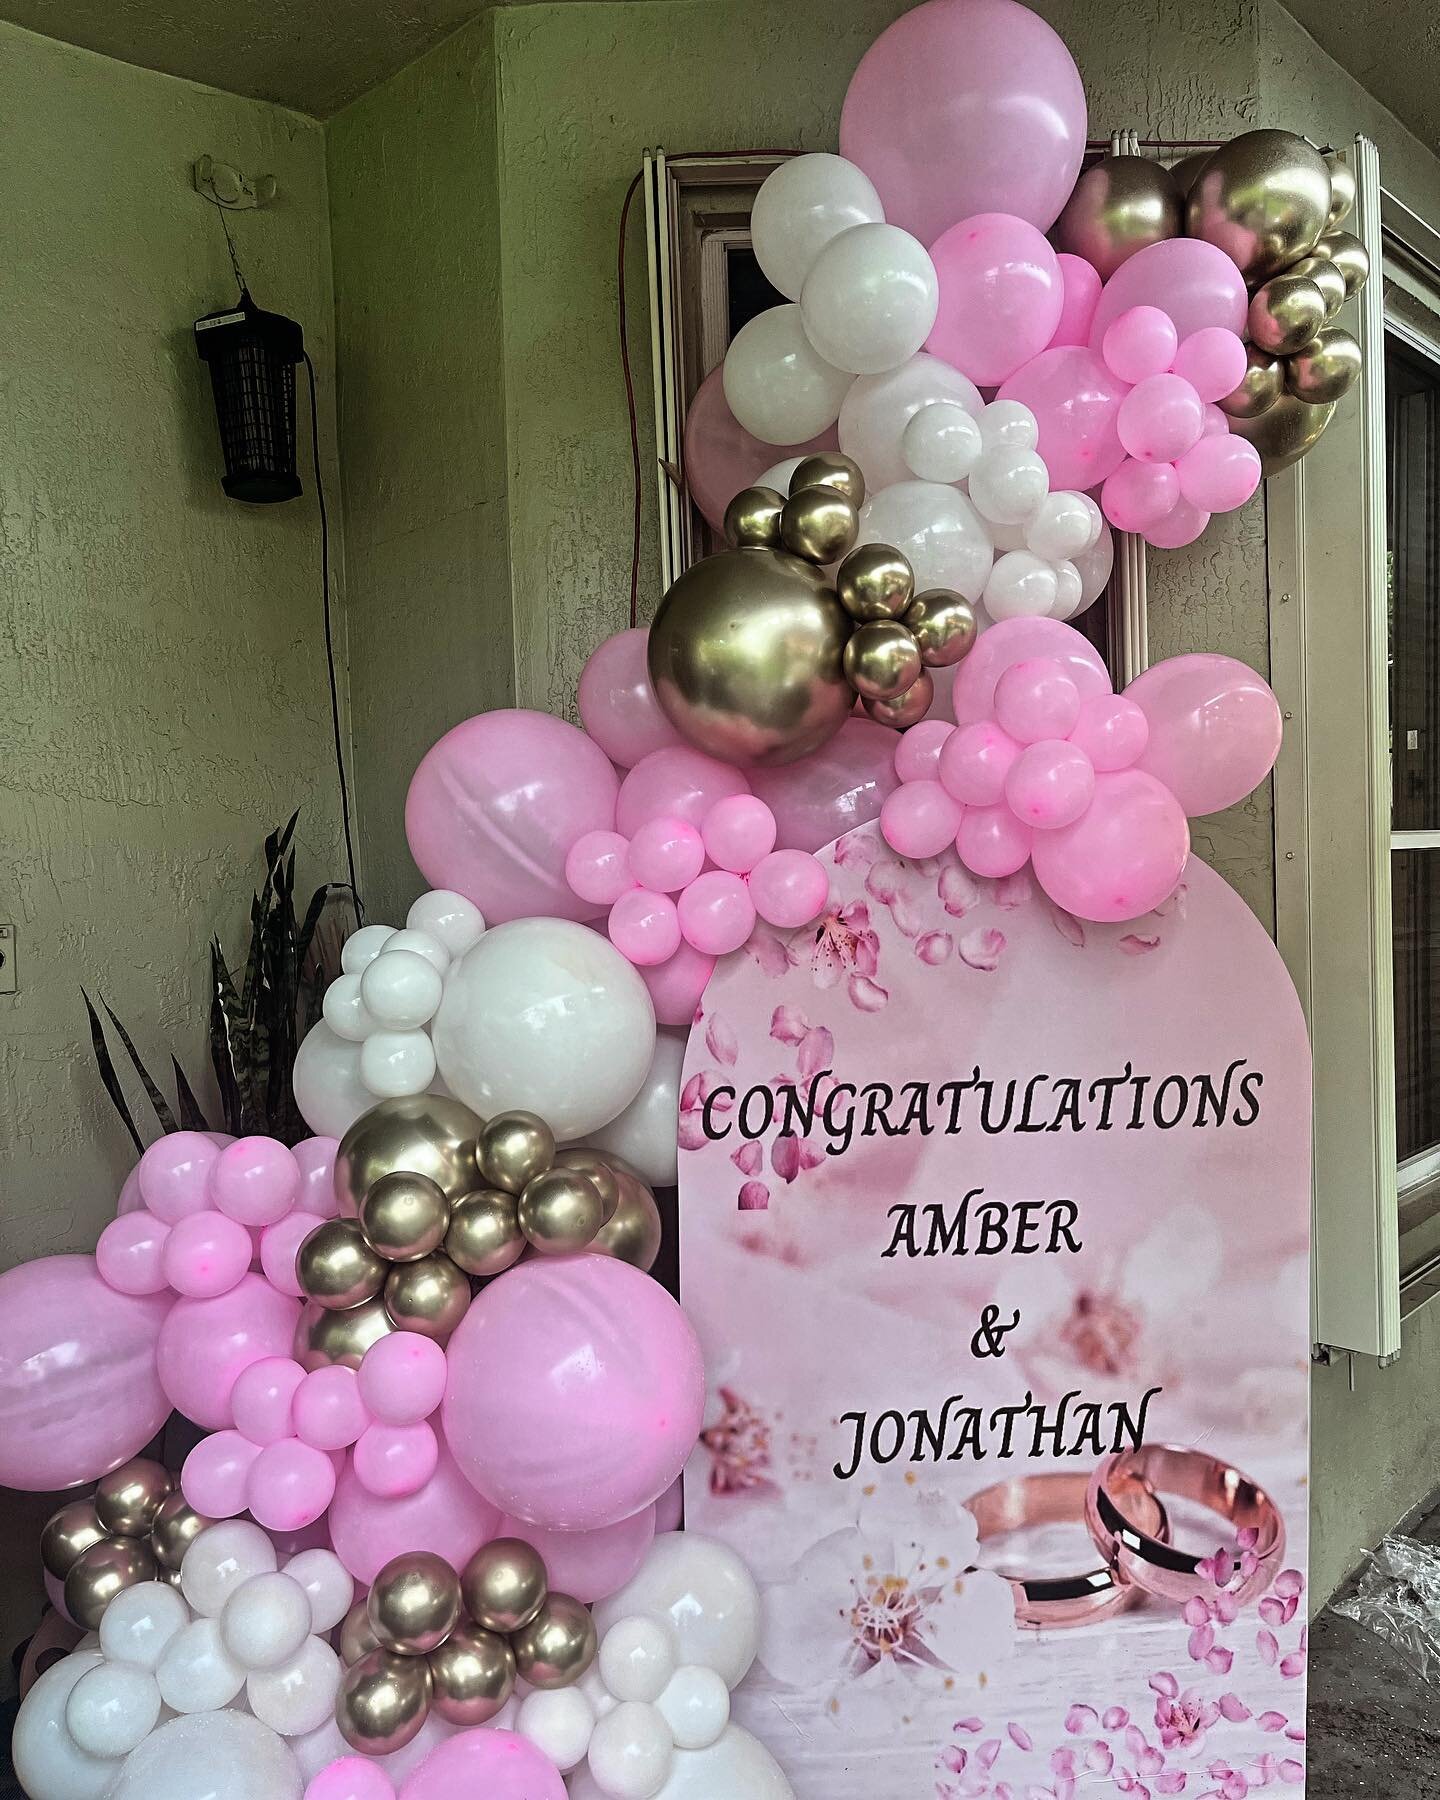 Love is in the air, and so are these dreamy pink and white balloons! 🎈💖 Cheers to the newlyweds! 🥂✨ #JustMarried #LoveInTheAir #balloongarland #eventdecor #backdroprental